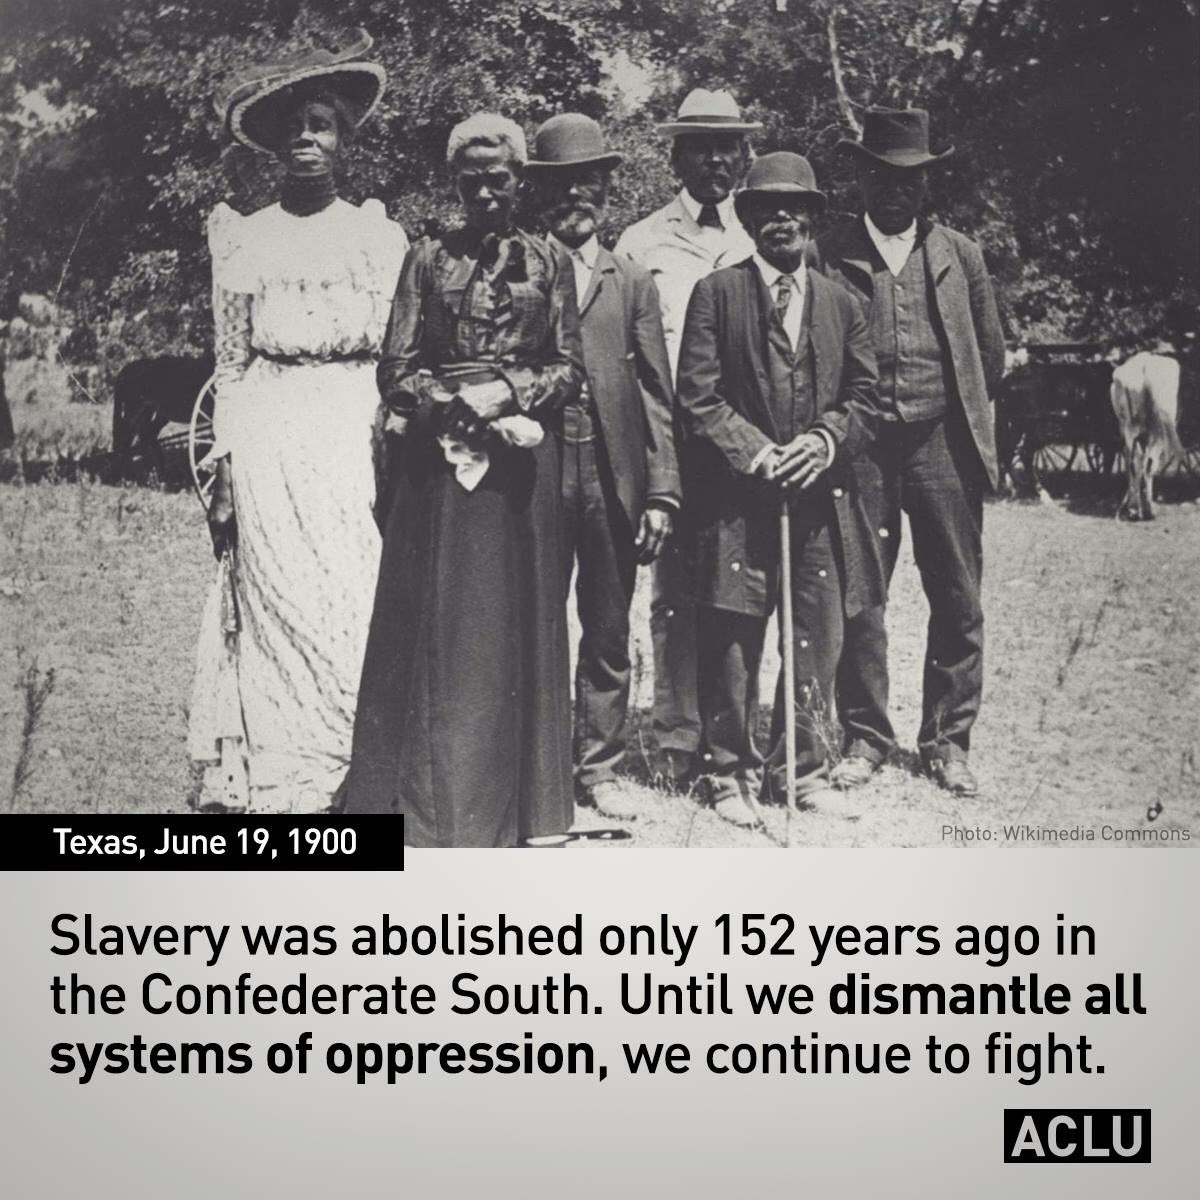 RT @ACLU: We're celebrating #Juneteenth by continuing the fight for freedom for all https://t.co/e4Kxz2MRiV